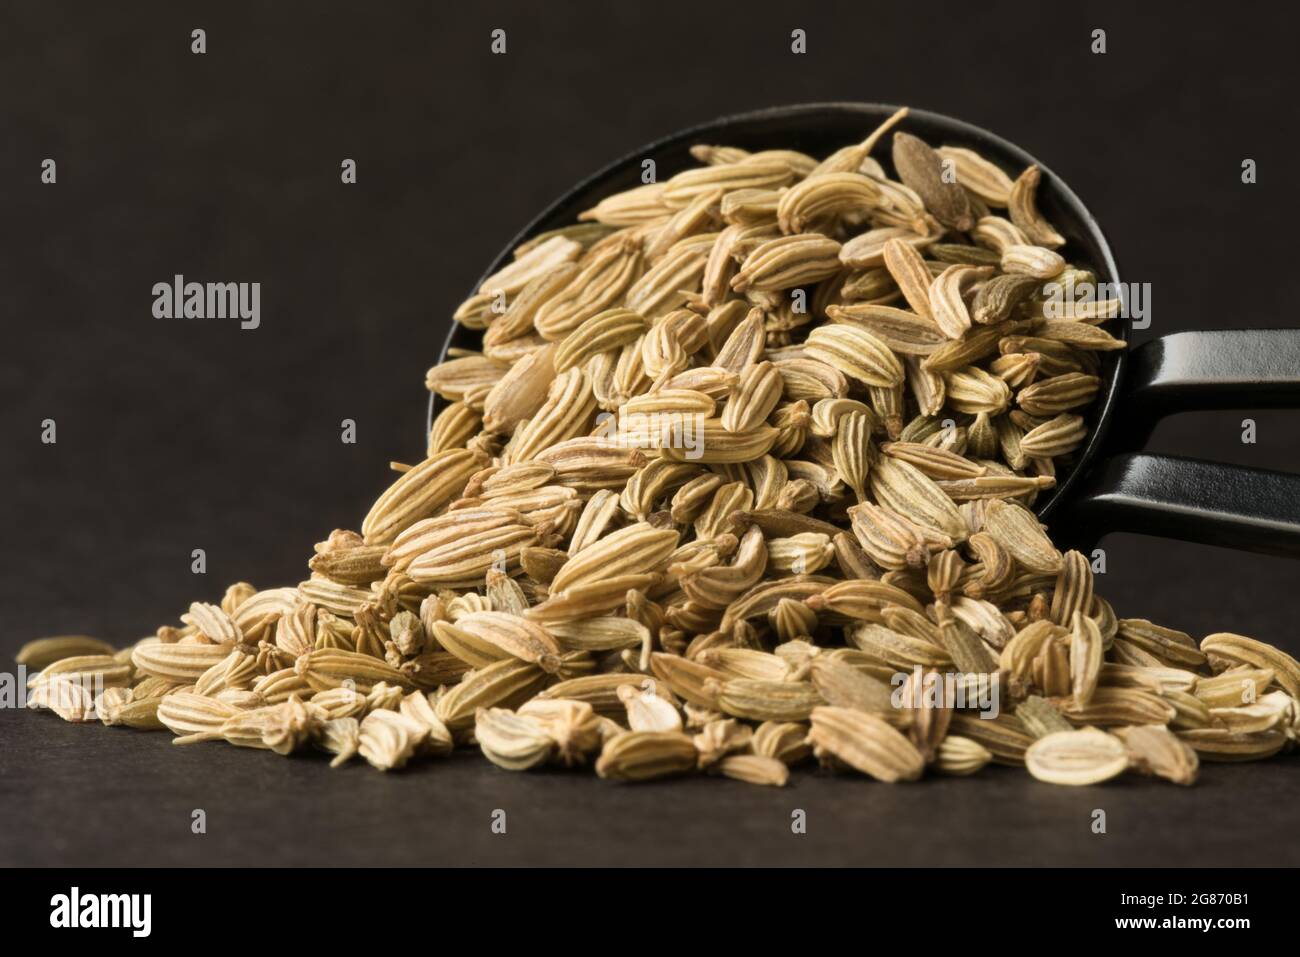 Fennel Seeds Spilled from a Teaspoon Stock Photo